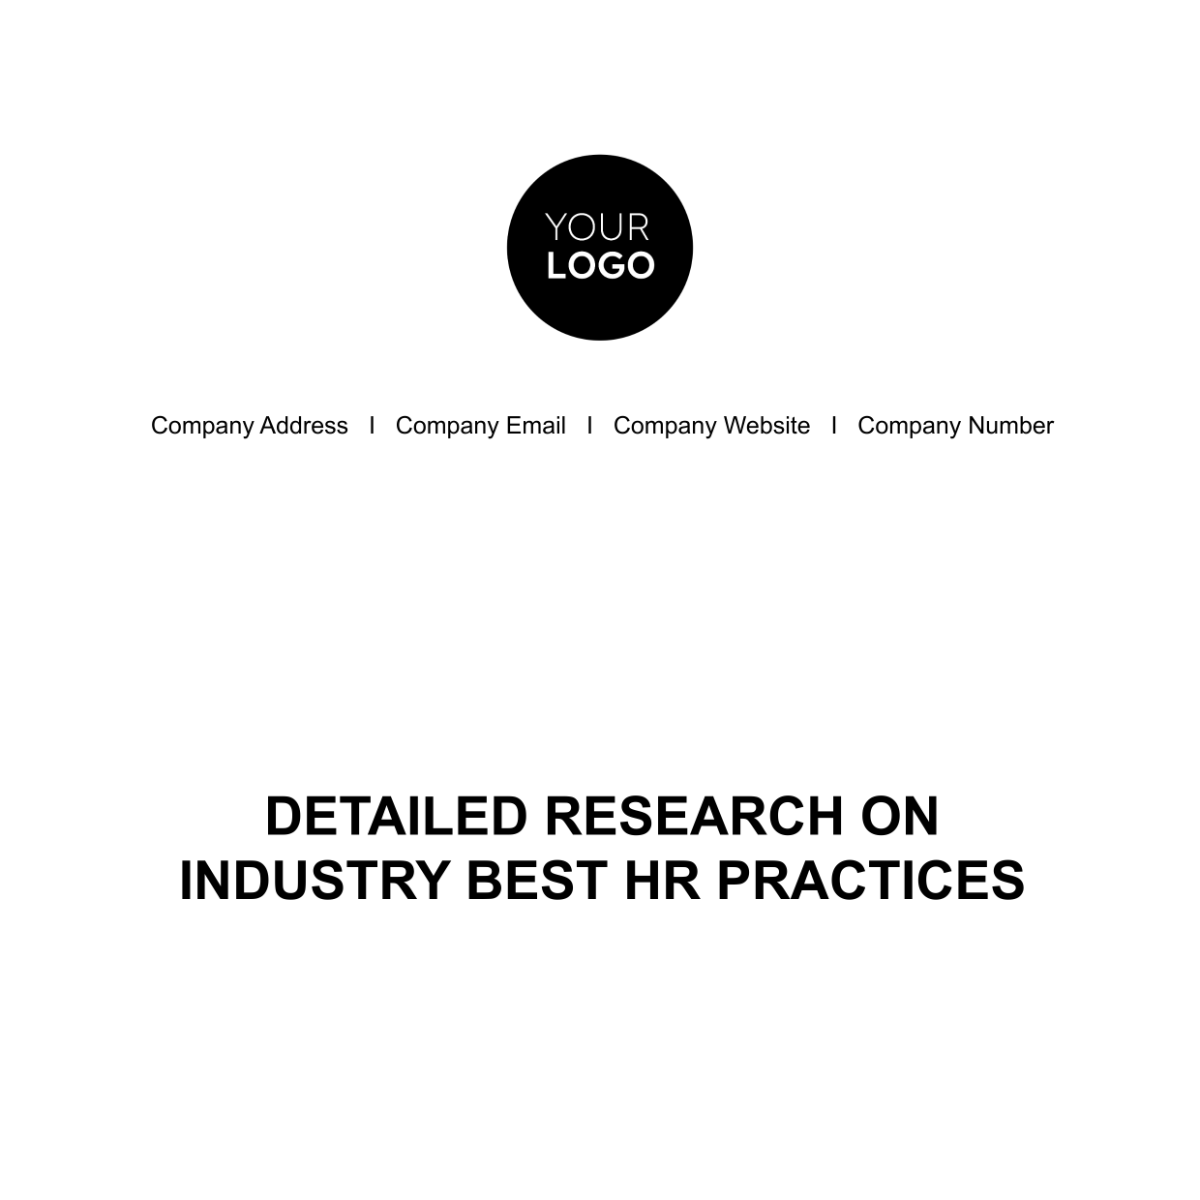 Detailed Research on Industry Best HR Practices Template